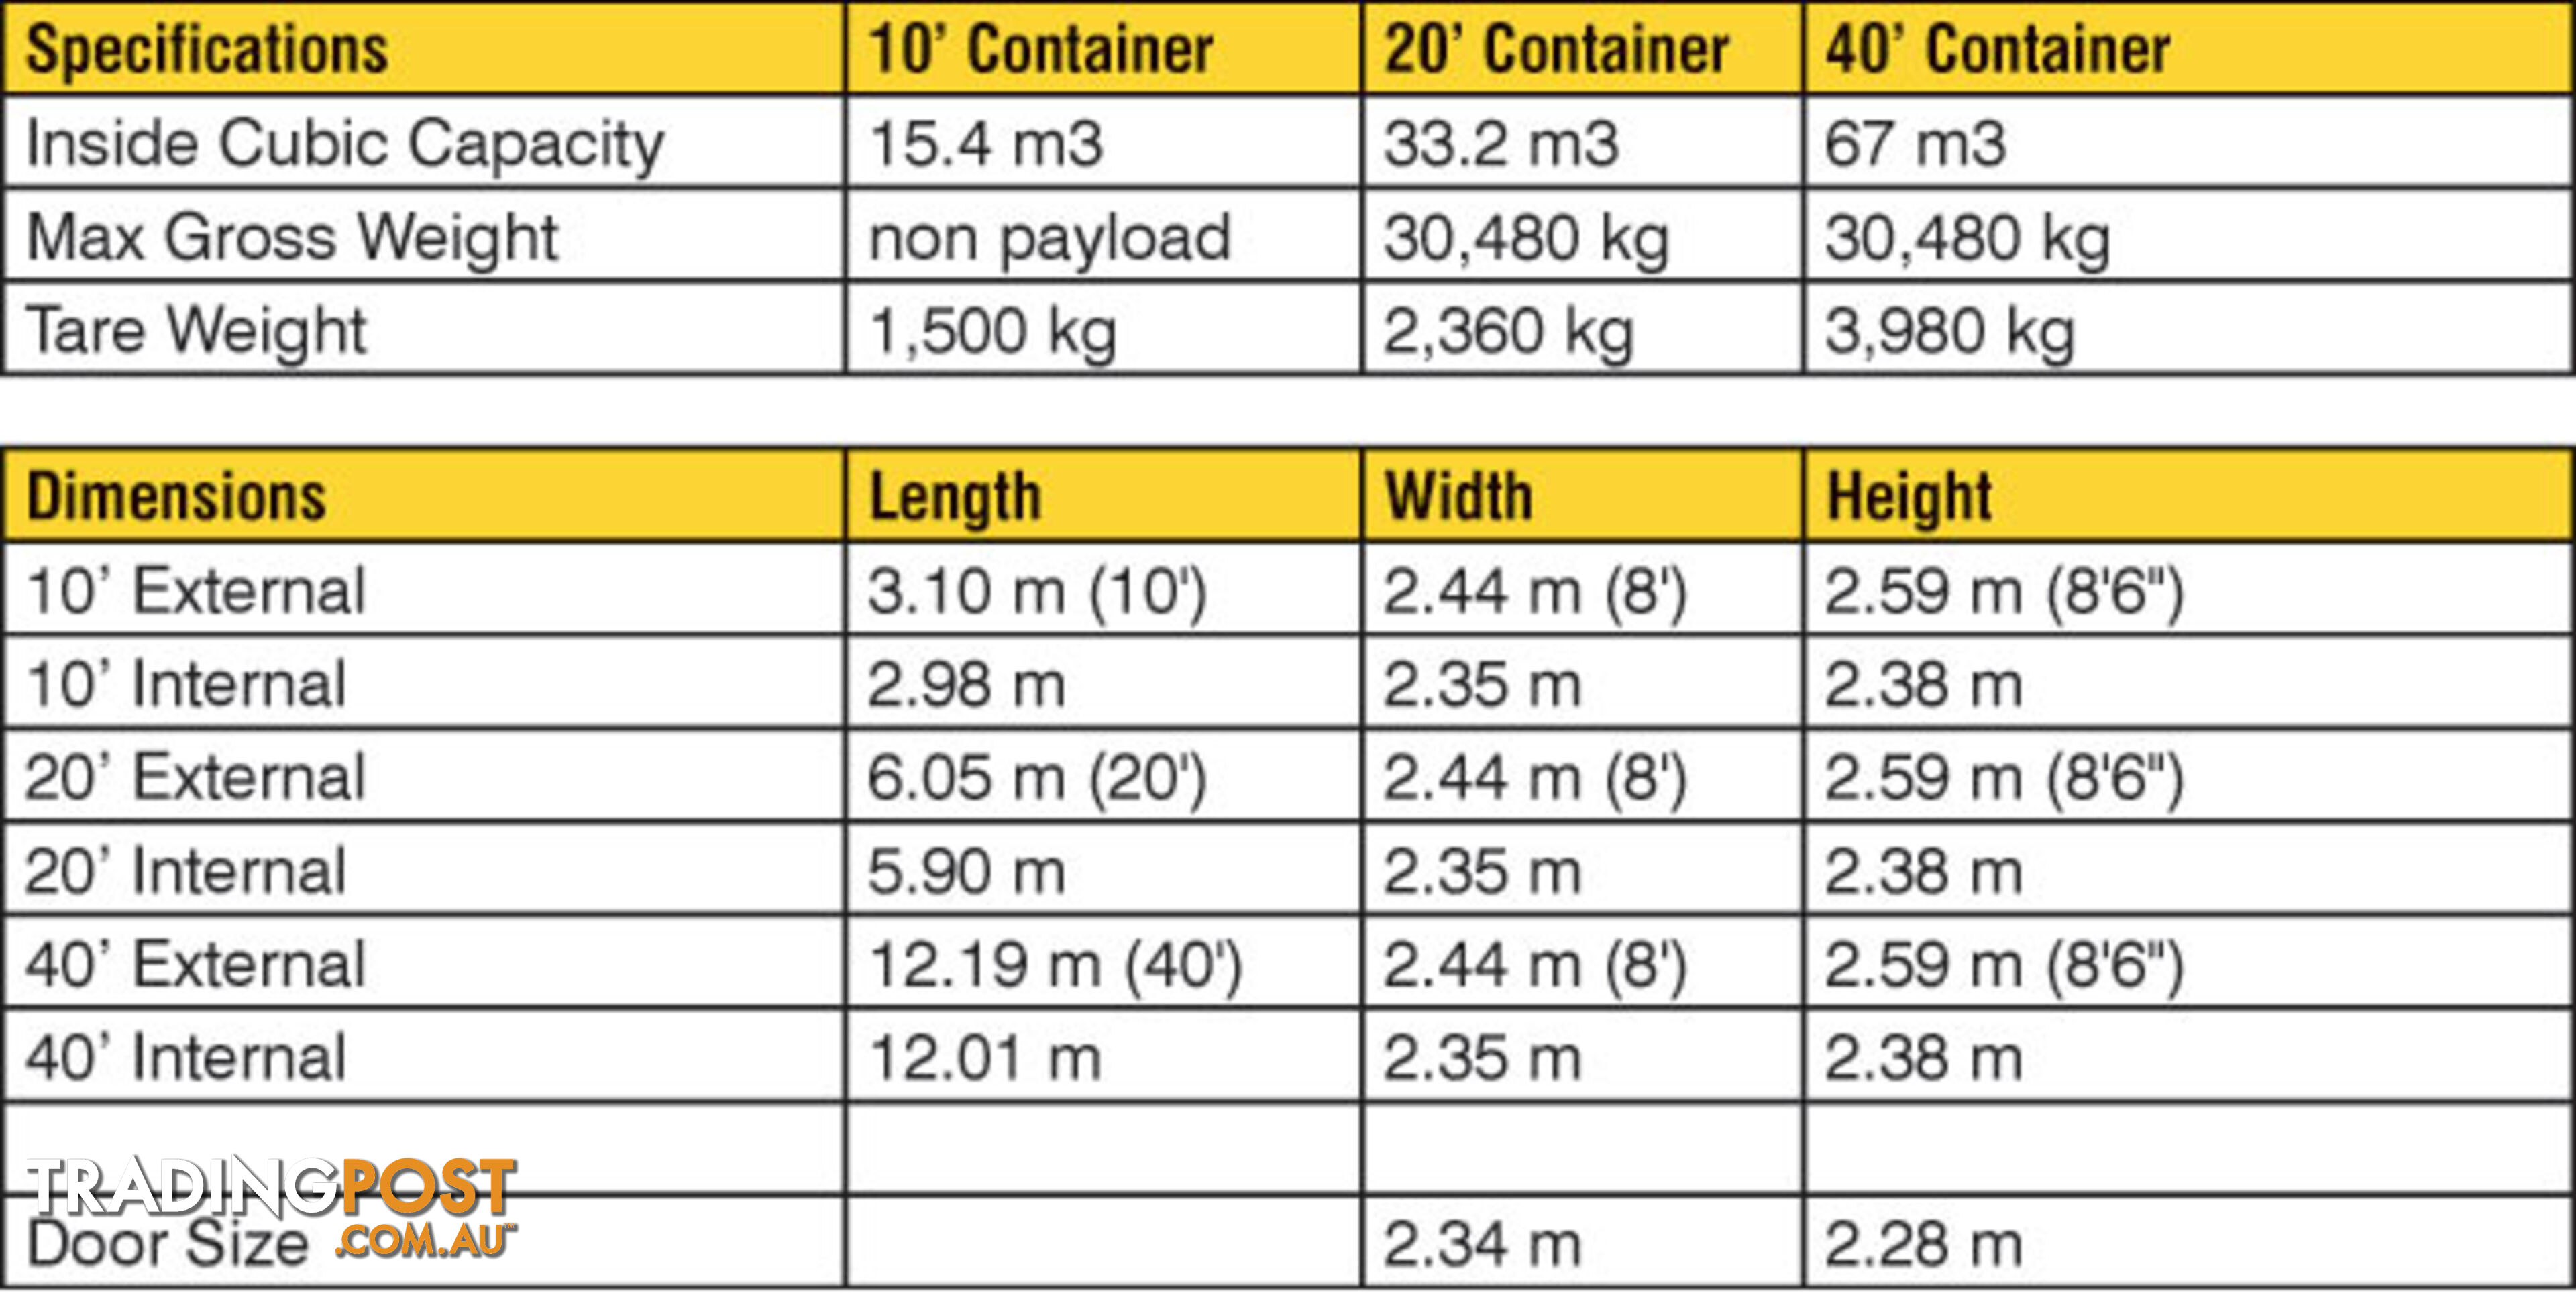 New 20ft Shipping Containers Williamtown - From $6850 + GST